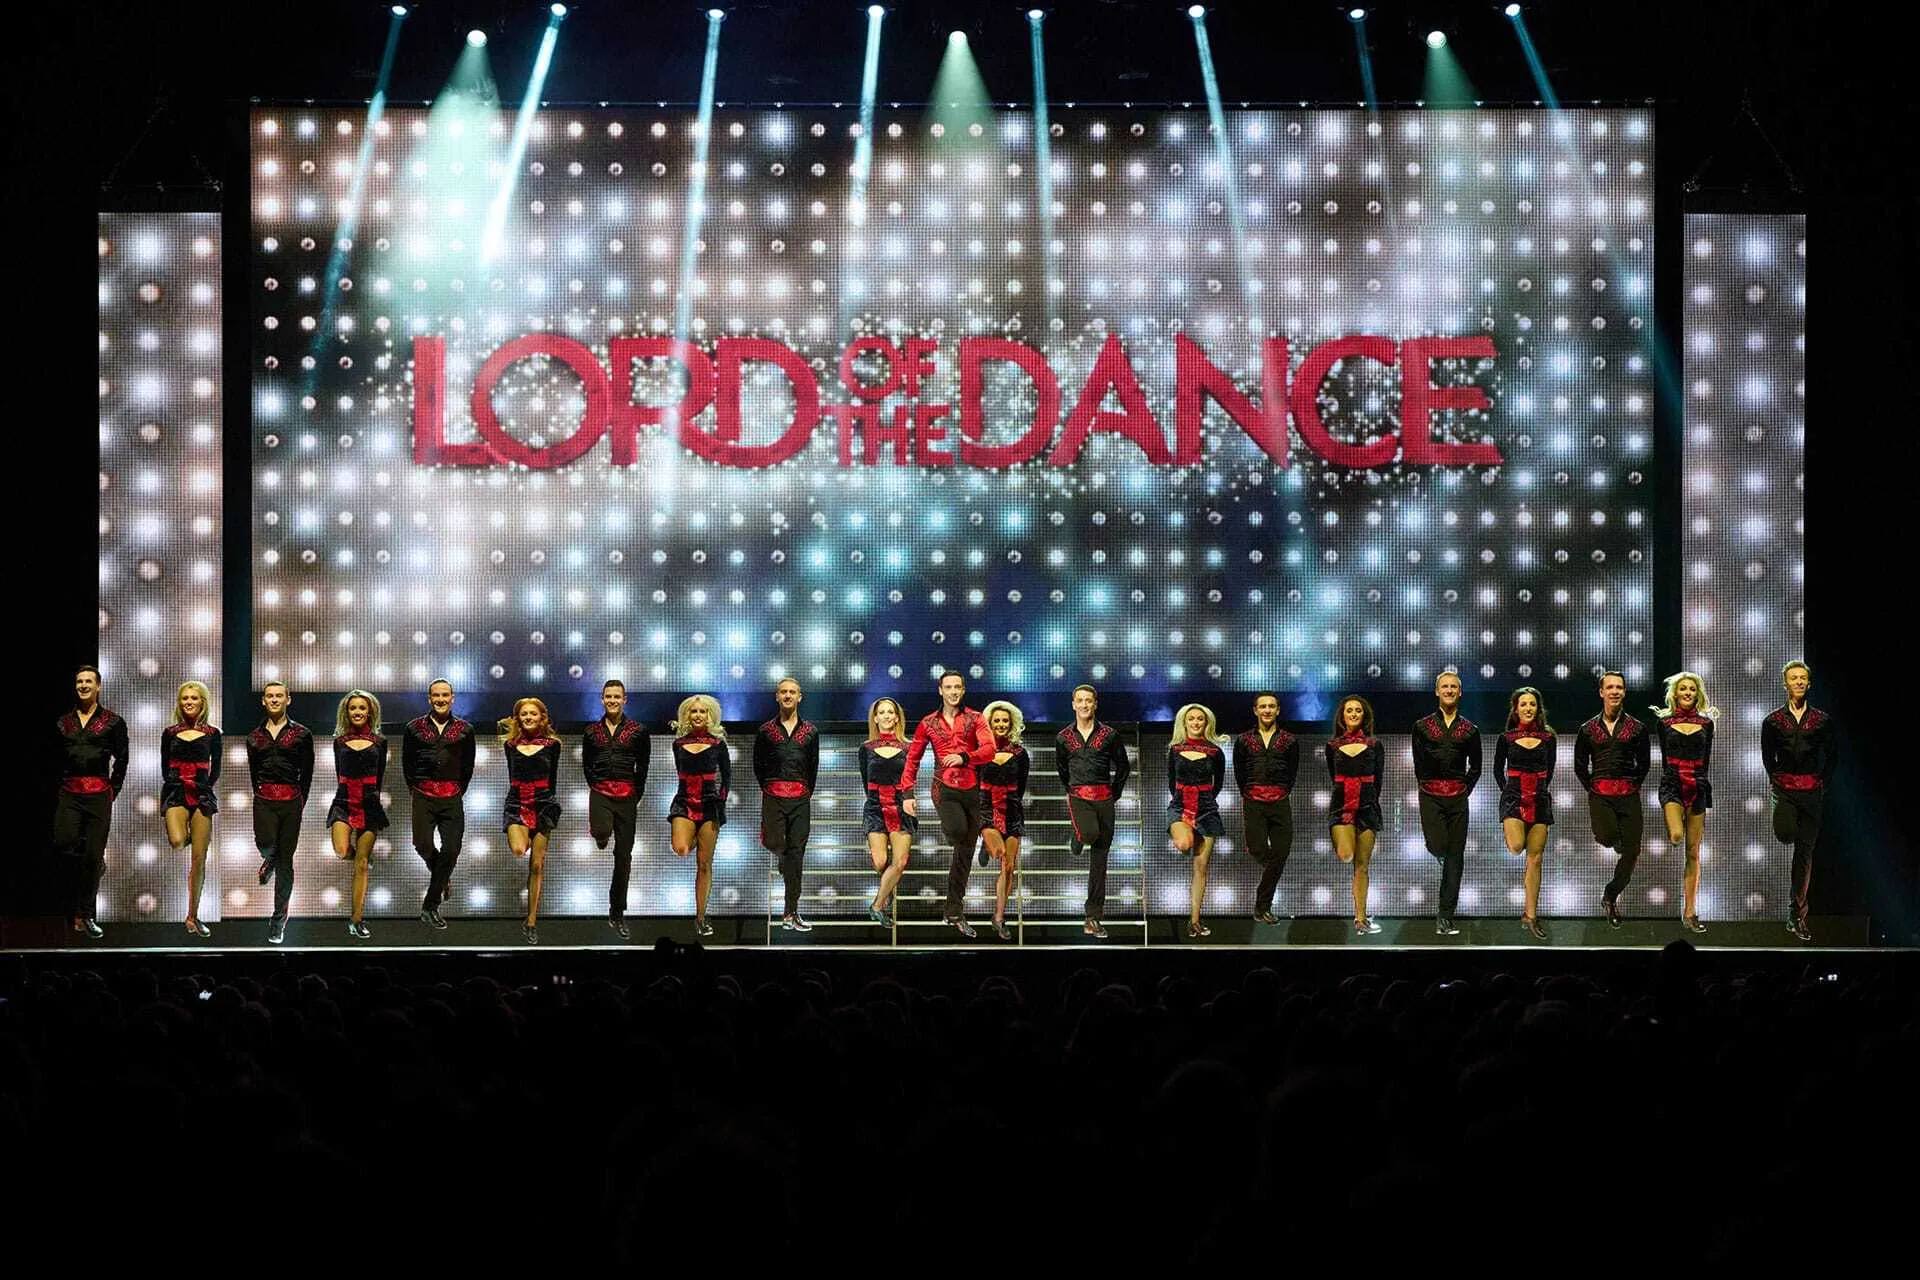 Lord of the Dance Brings High Energy Irish Dancing to Denver Rooster